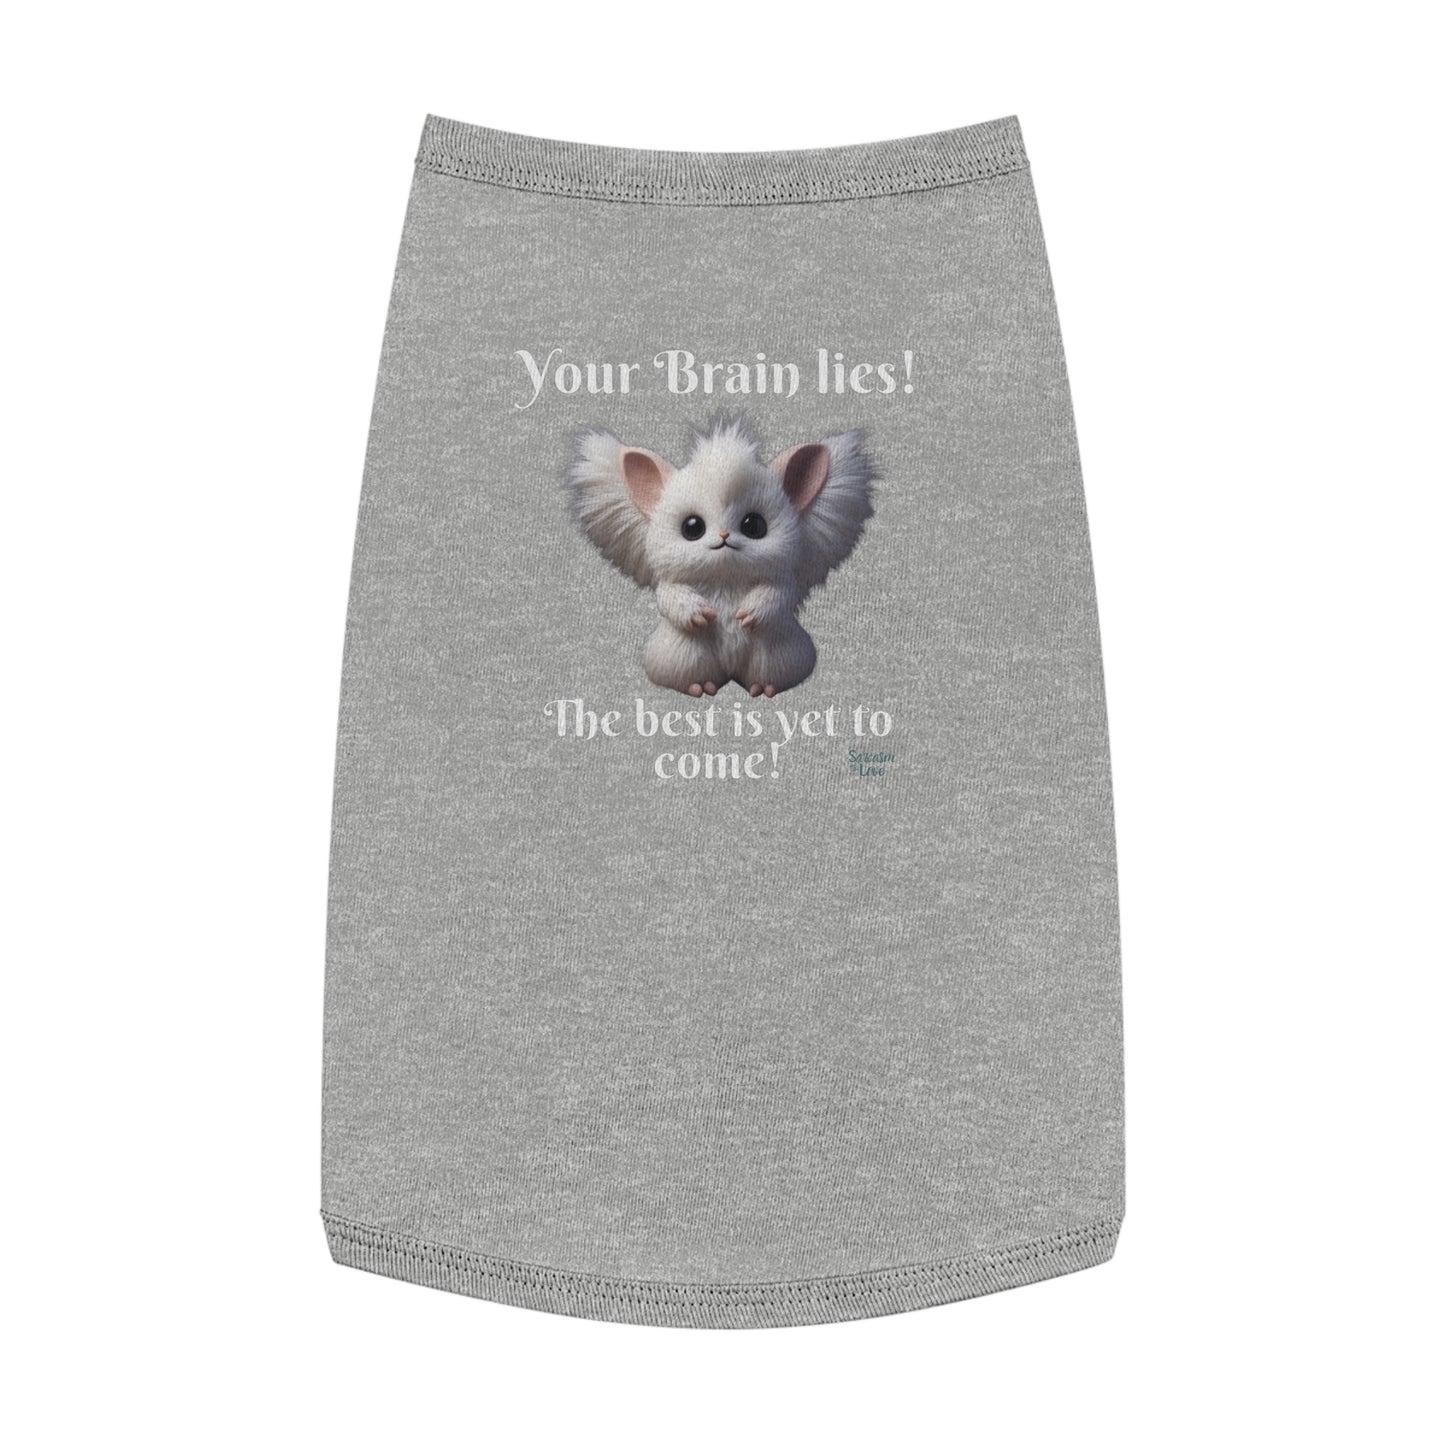 Your Brain Lies, the Best is Yet to Come" Pet Tank Top - Inspire and Encourage Your Pet